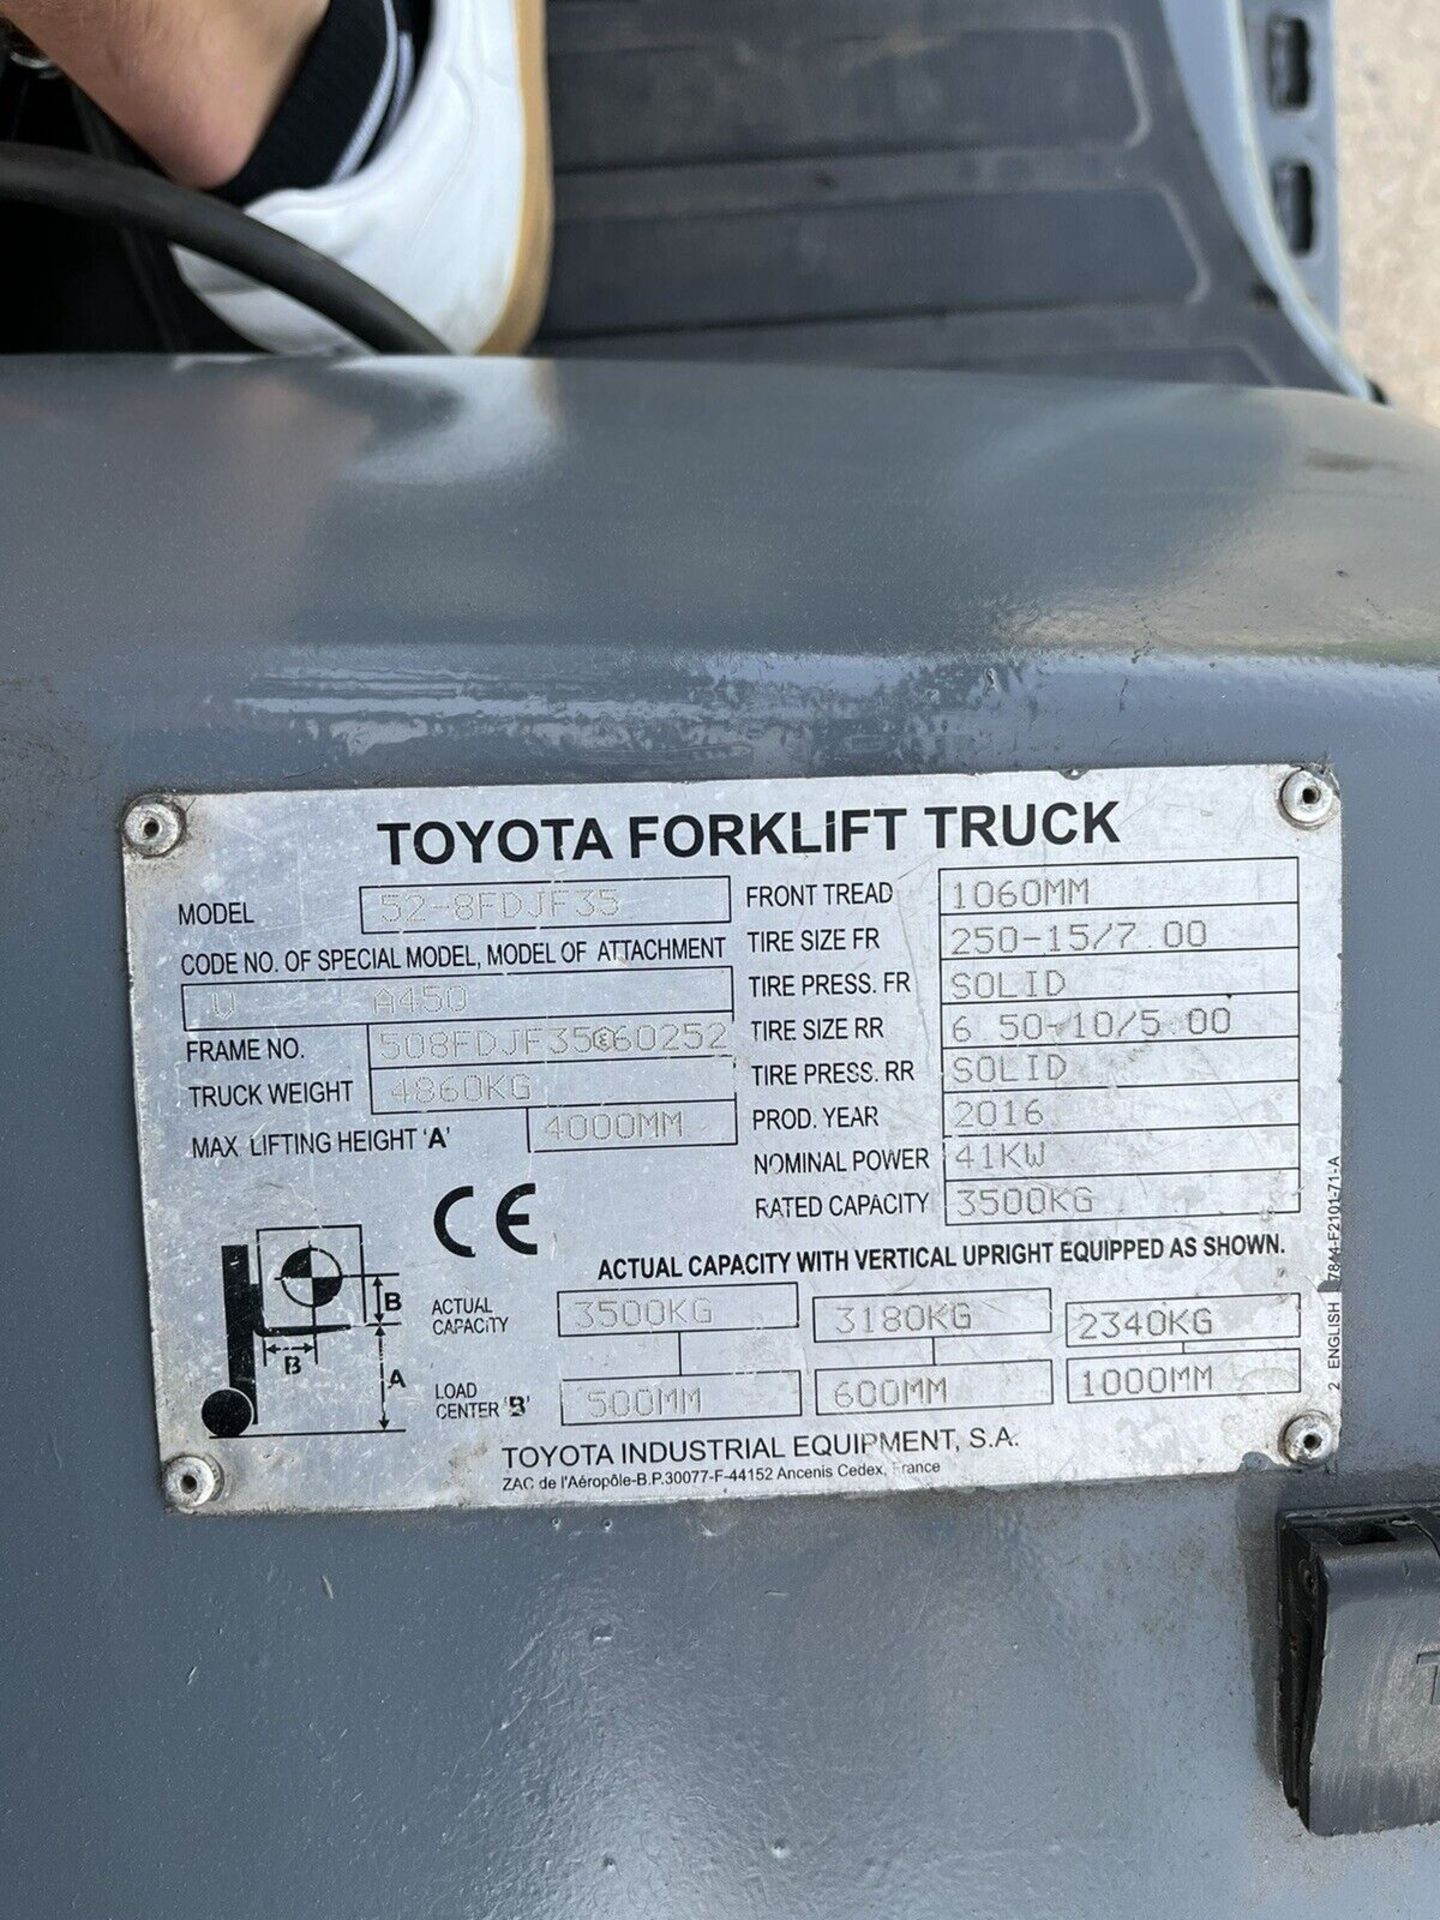 Toyota 3.5 Tonne Diesel Forklift Low Hours 2016 - Image 6 of 6